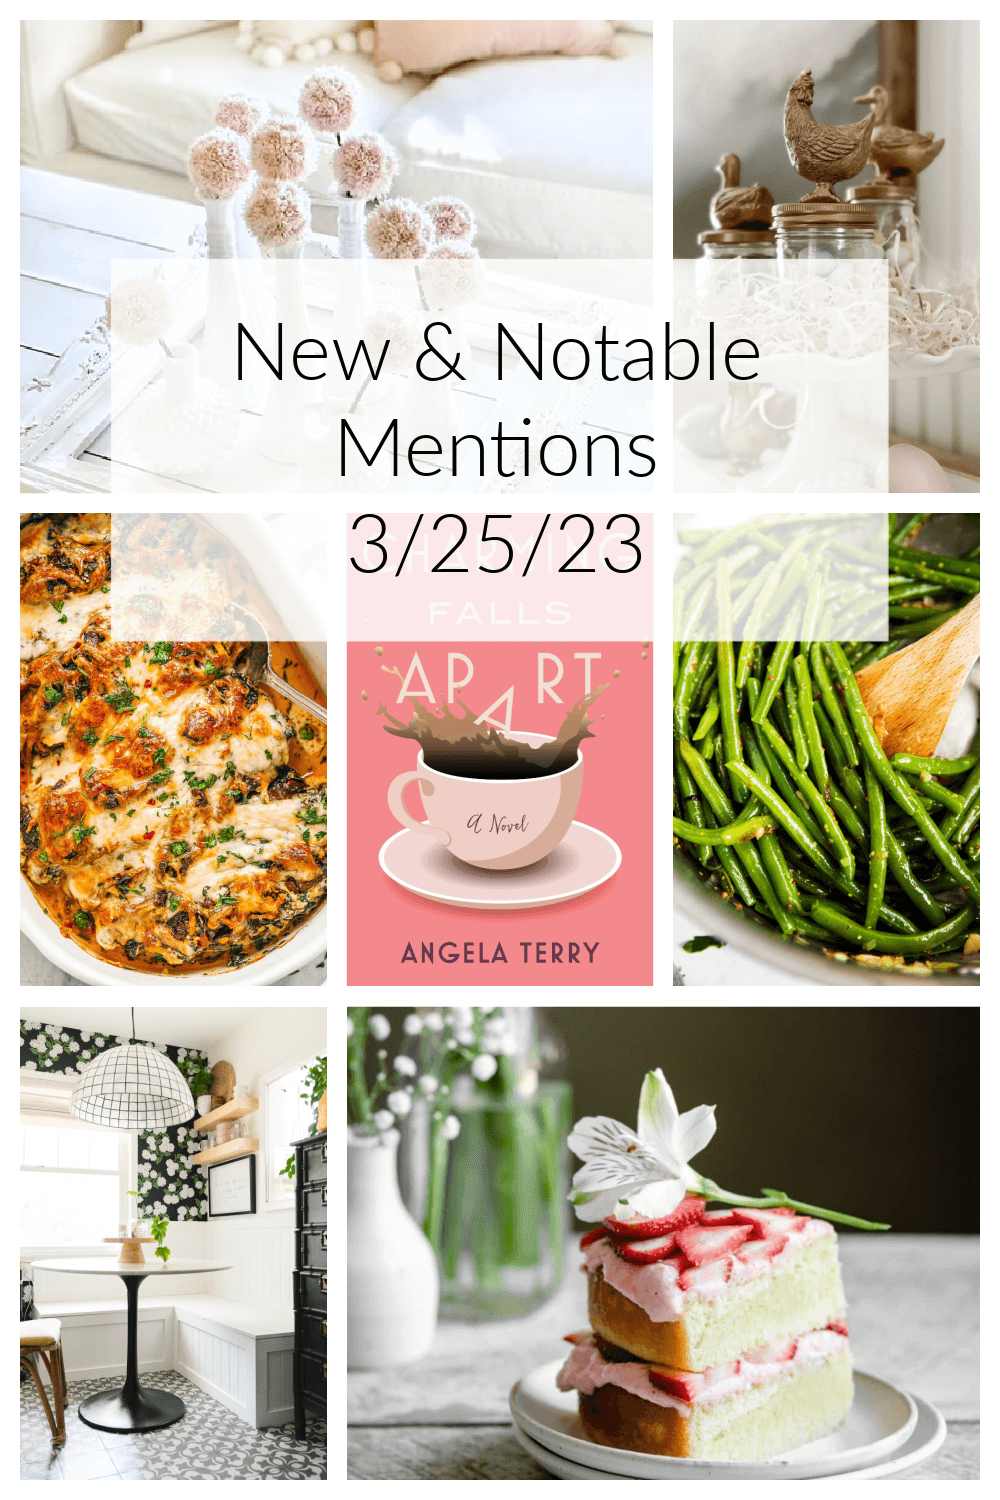 New & Notable Mentions 3/25/23